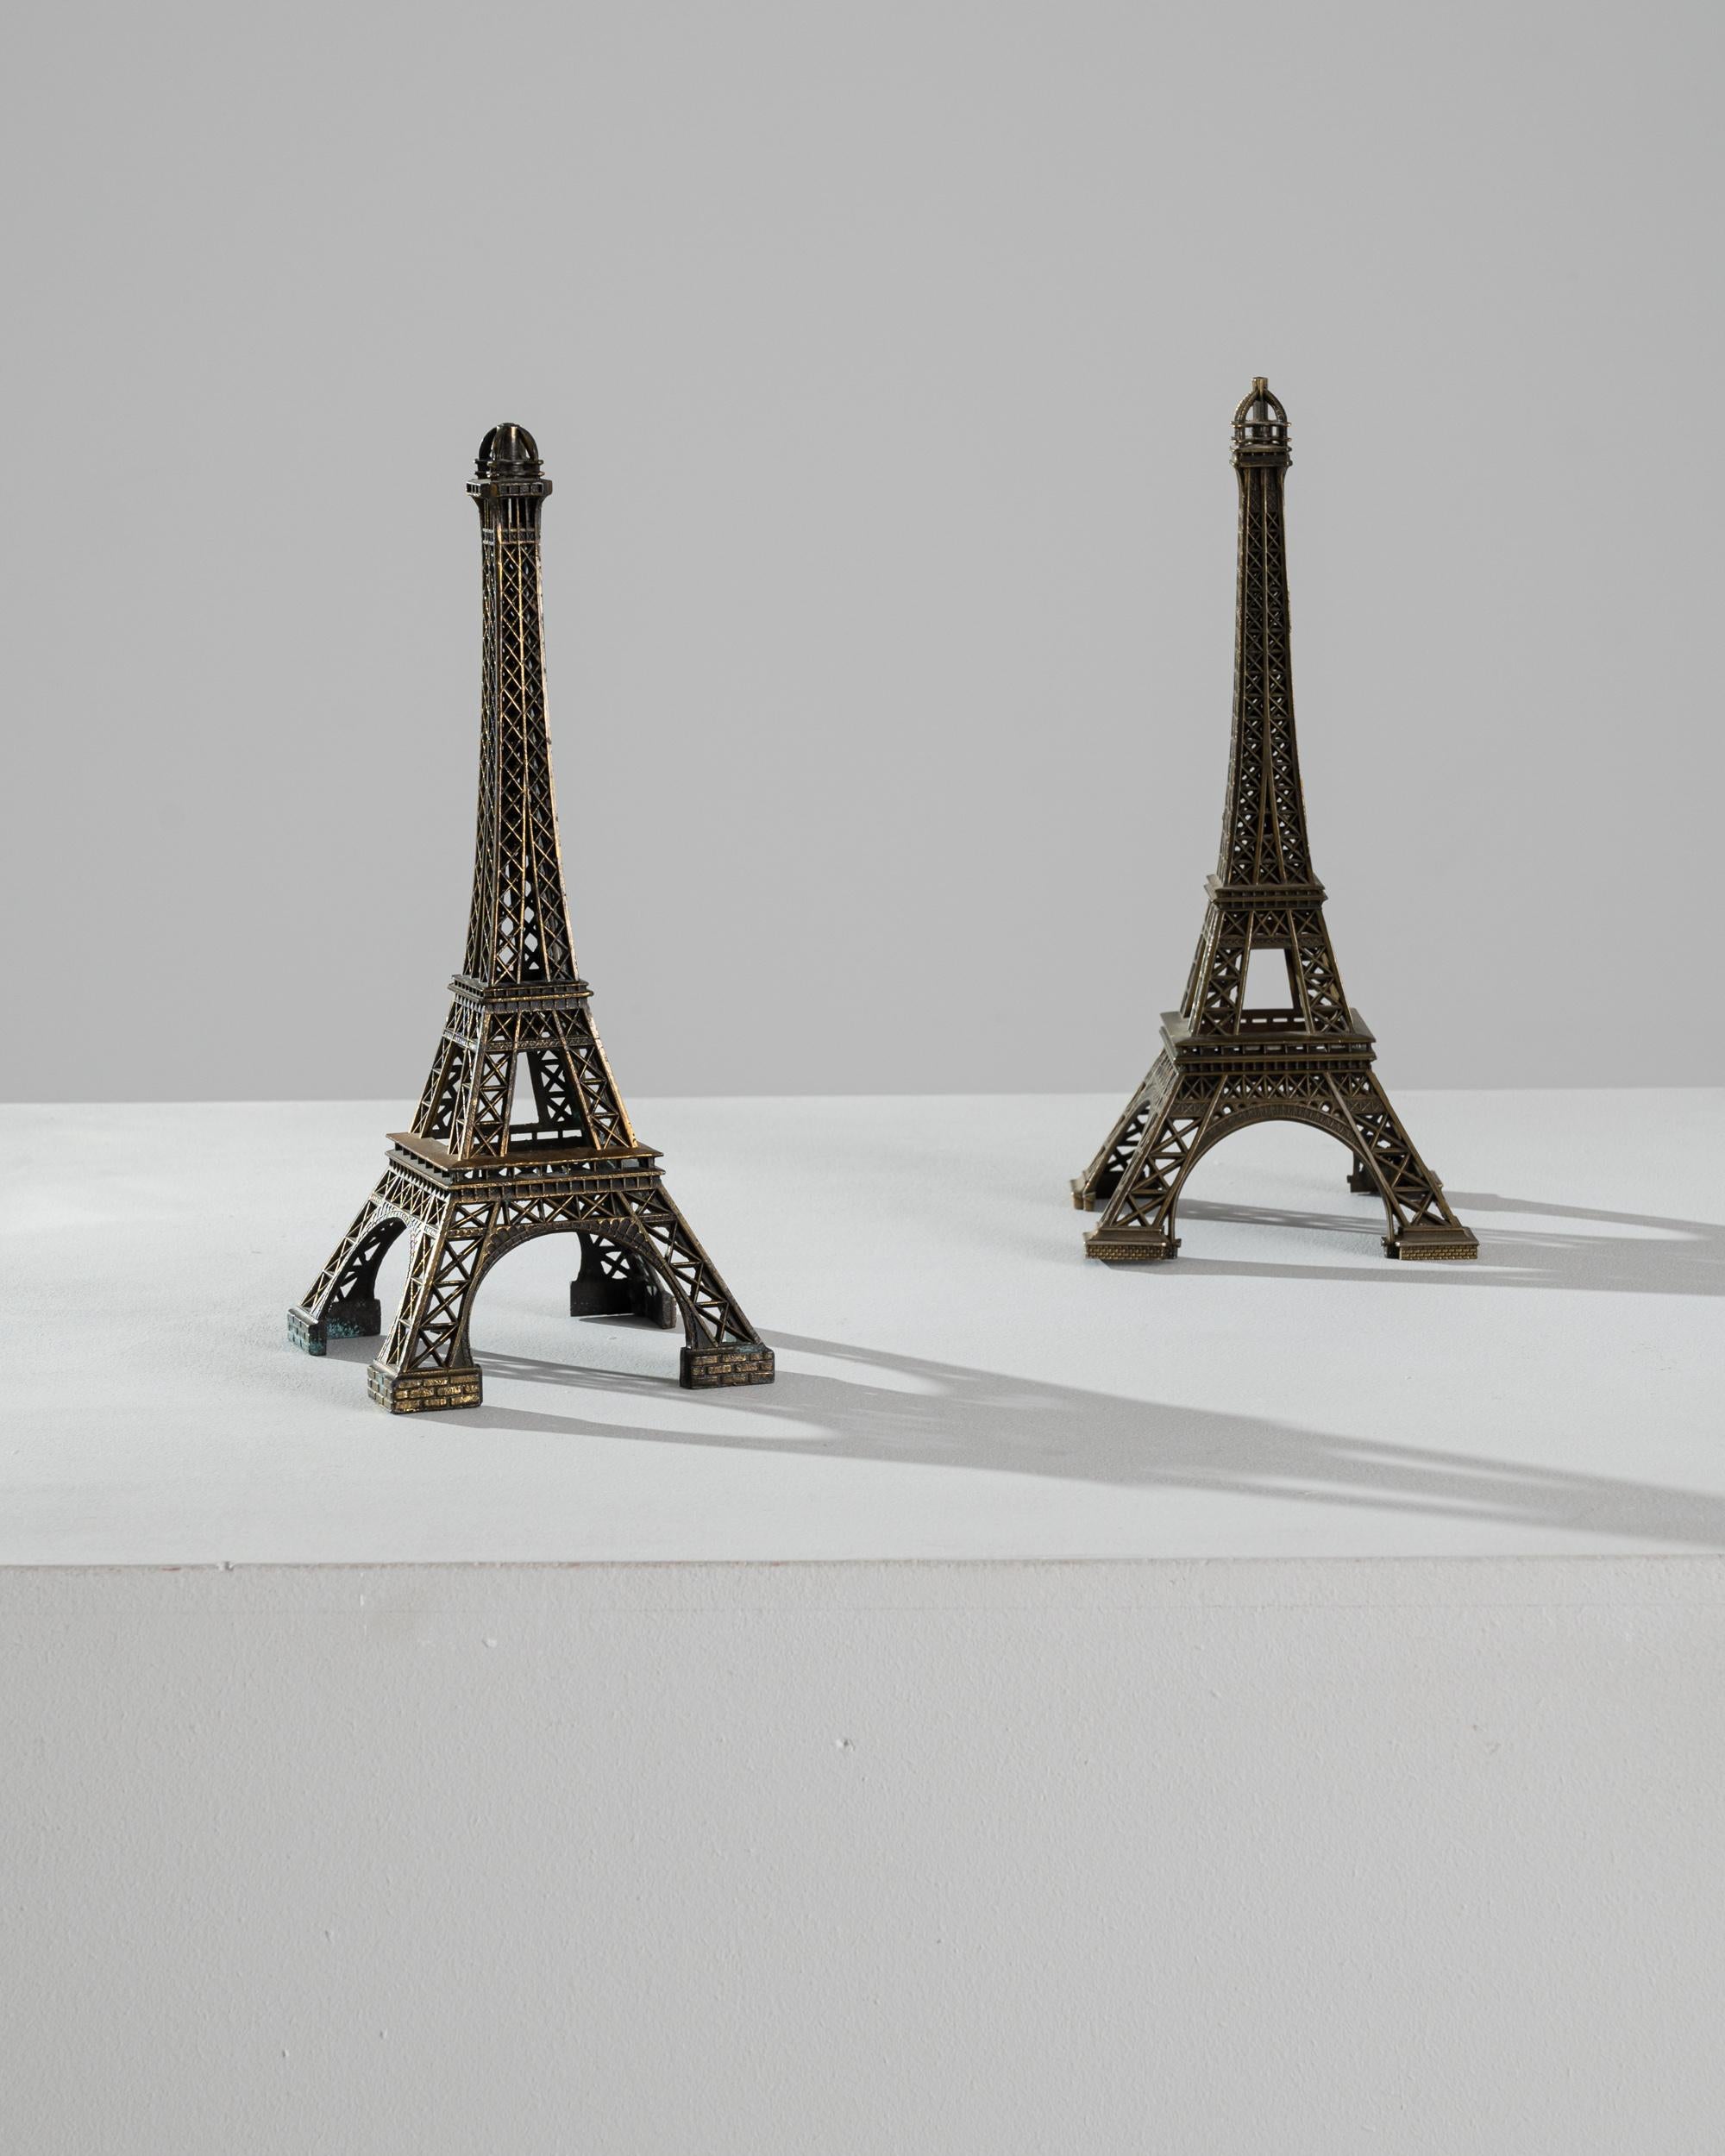 This pair of brass decorations in the shape of the Eiffel tower conjures the romance of a voyage to Paris. Made in France in the 20th Century, the intricate lattice-work is rendered in perfect detail, bringing the iconic monument to life. The dark